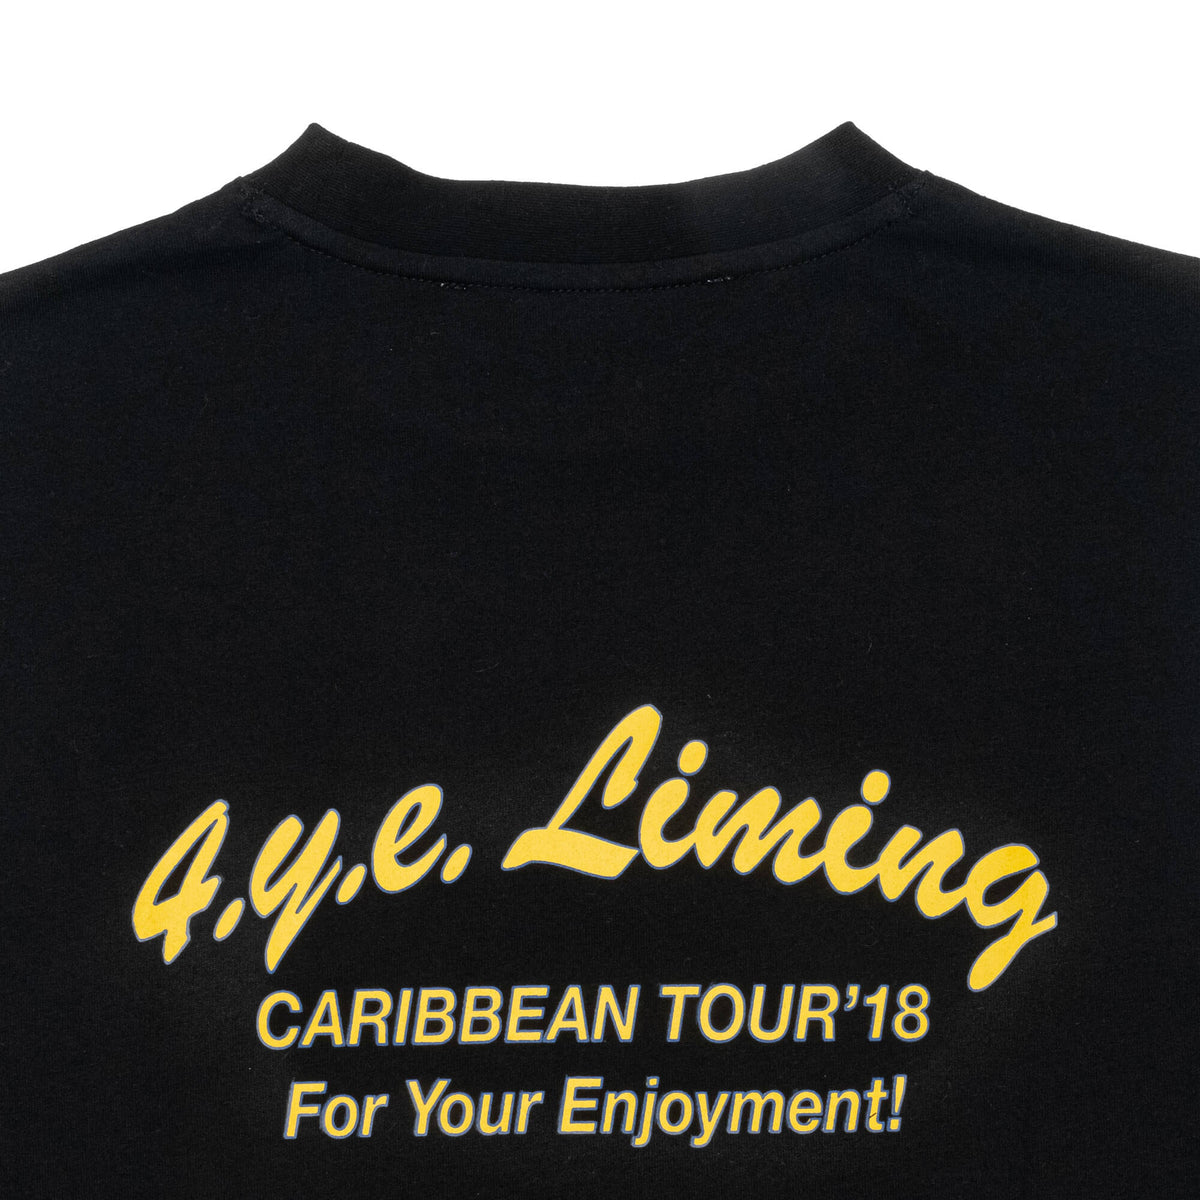 Close up image of back view, showcasing 4YE liming graphic. 